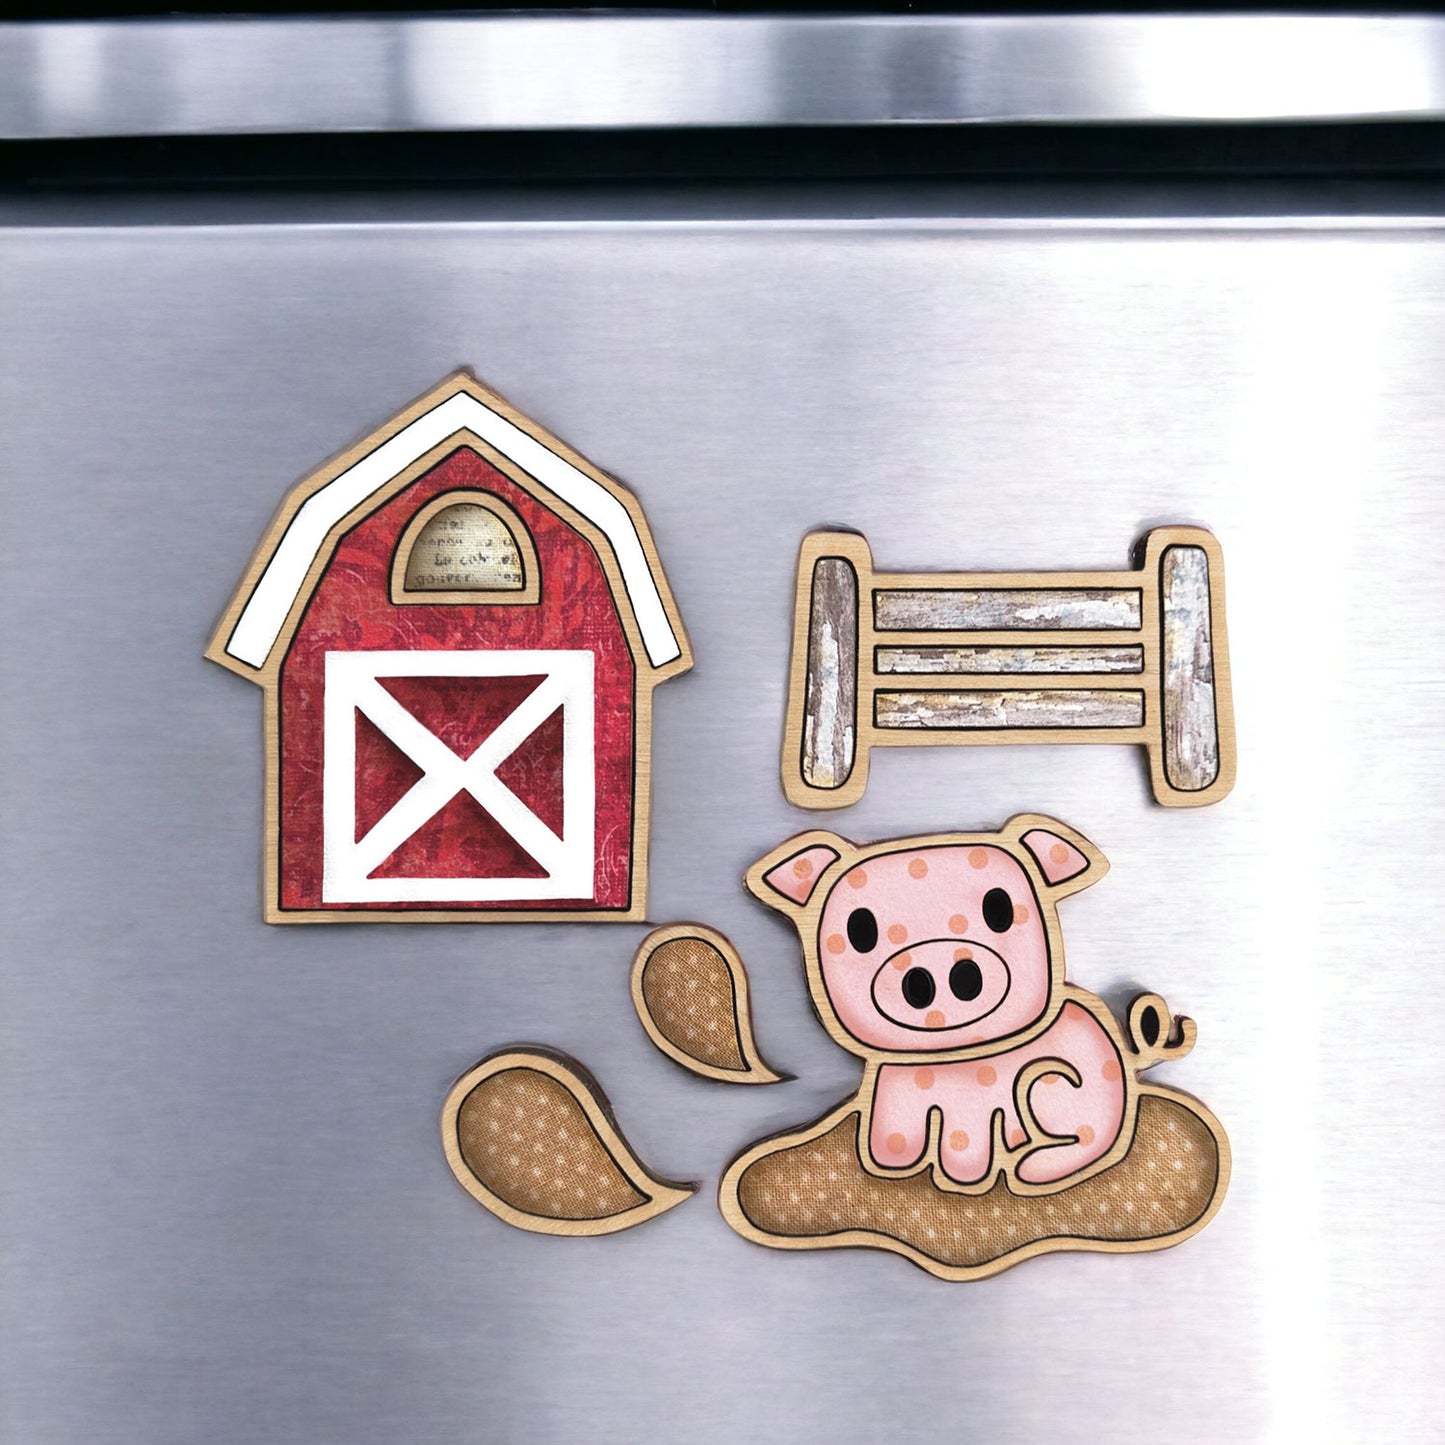 Whimsical Pig Magnet Collection (Set of 5)